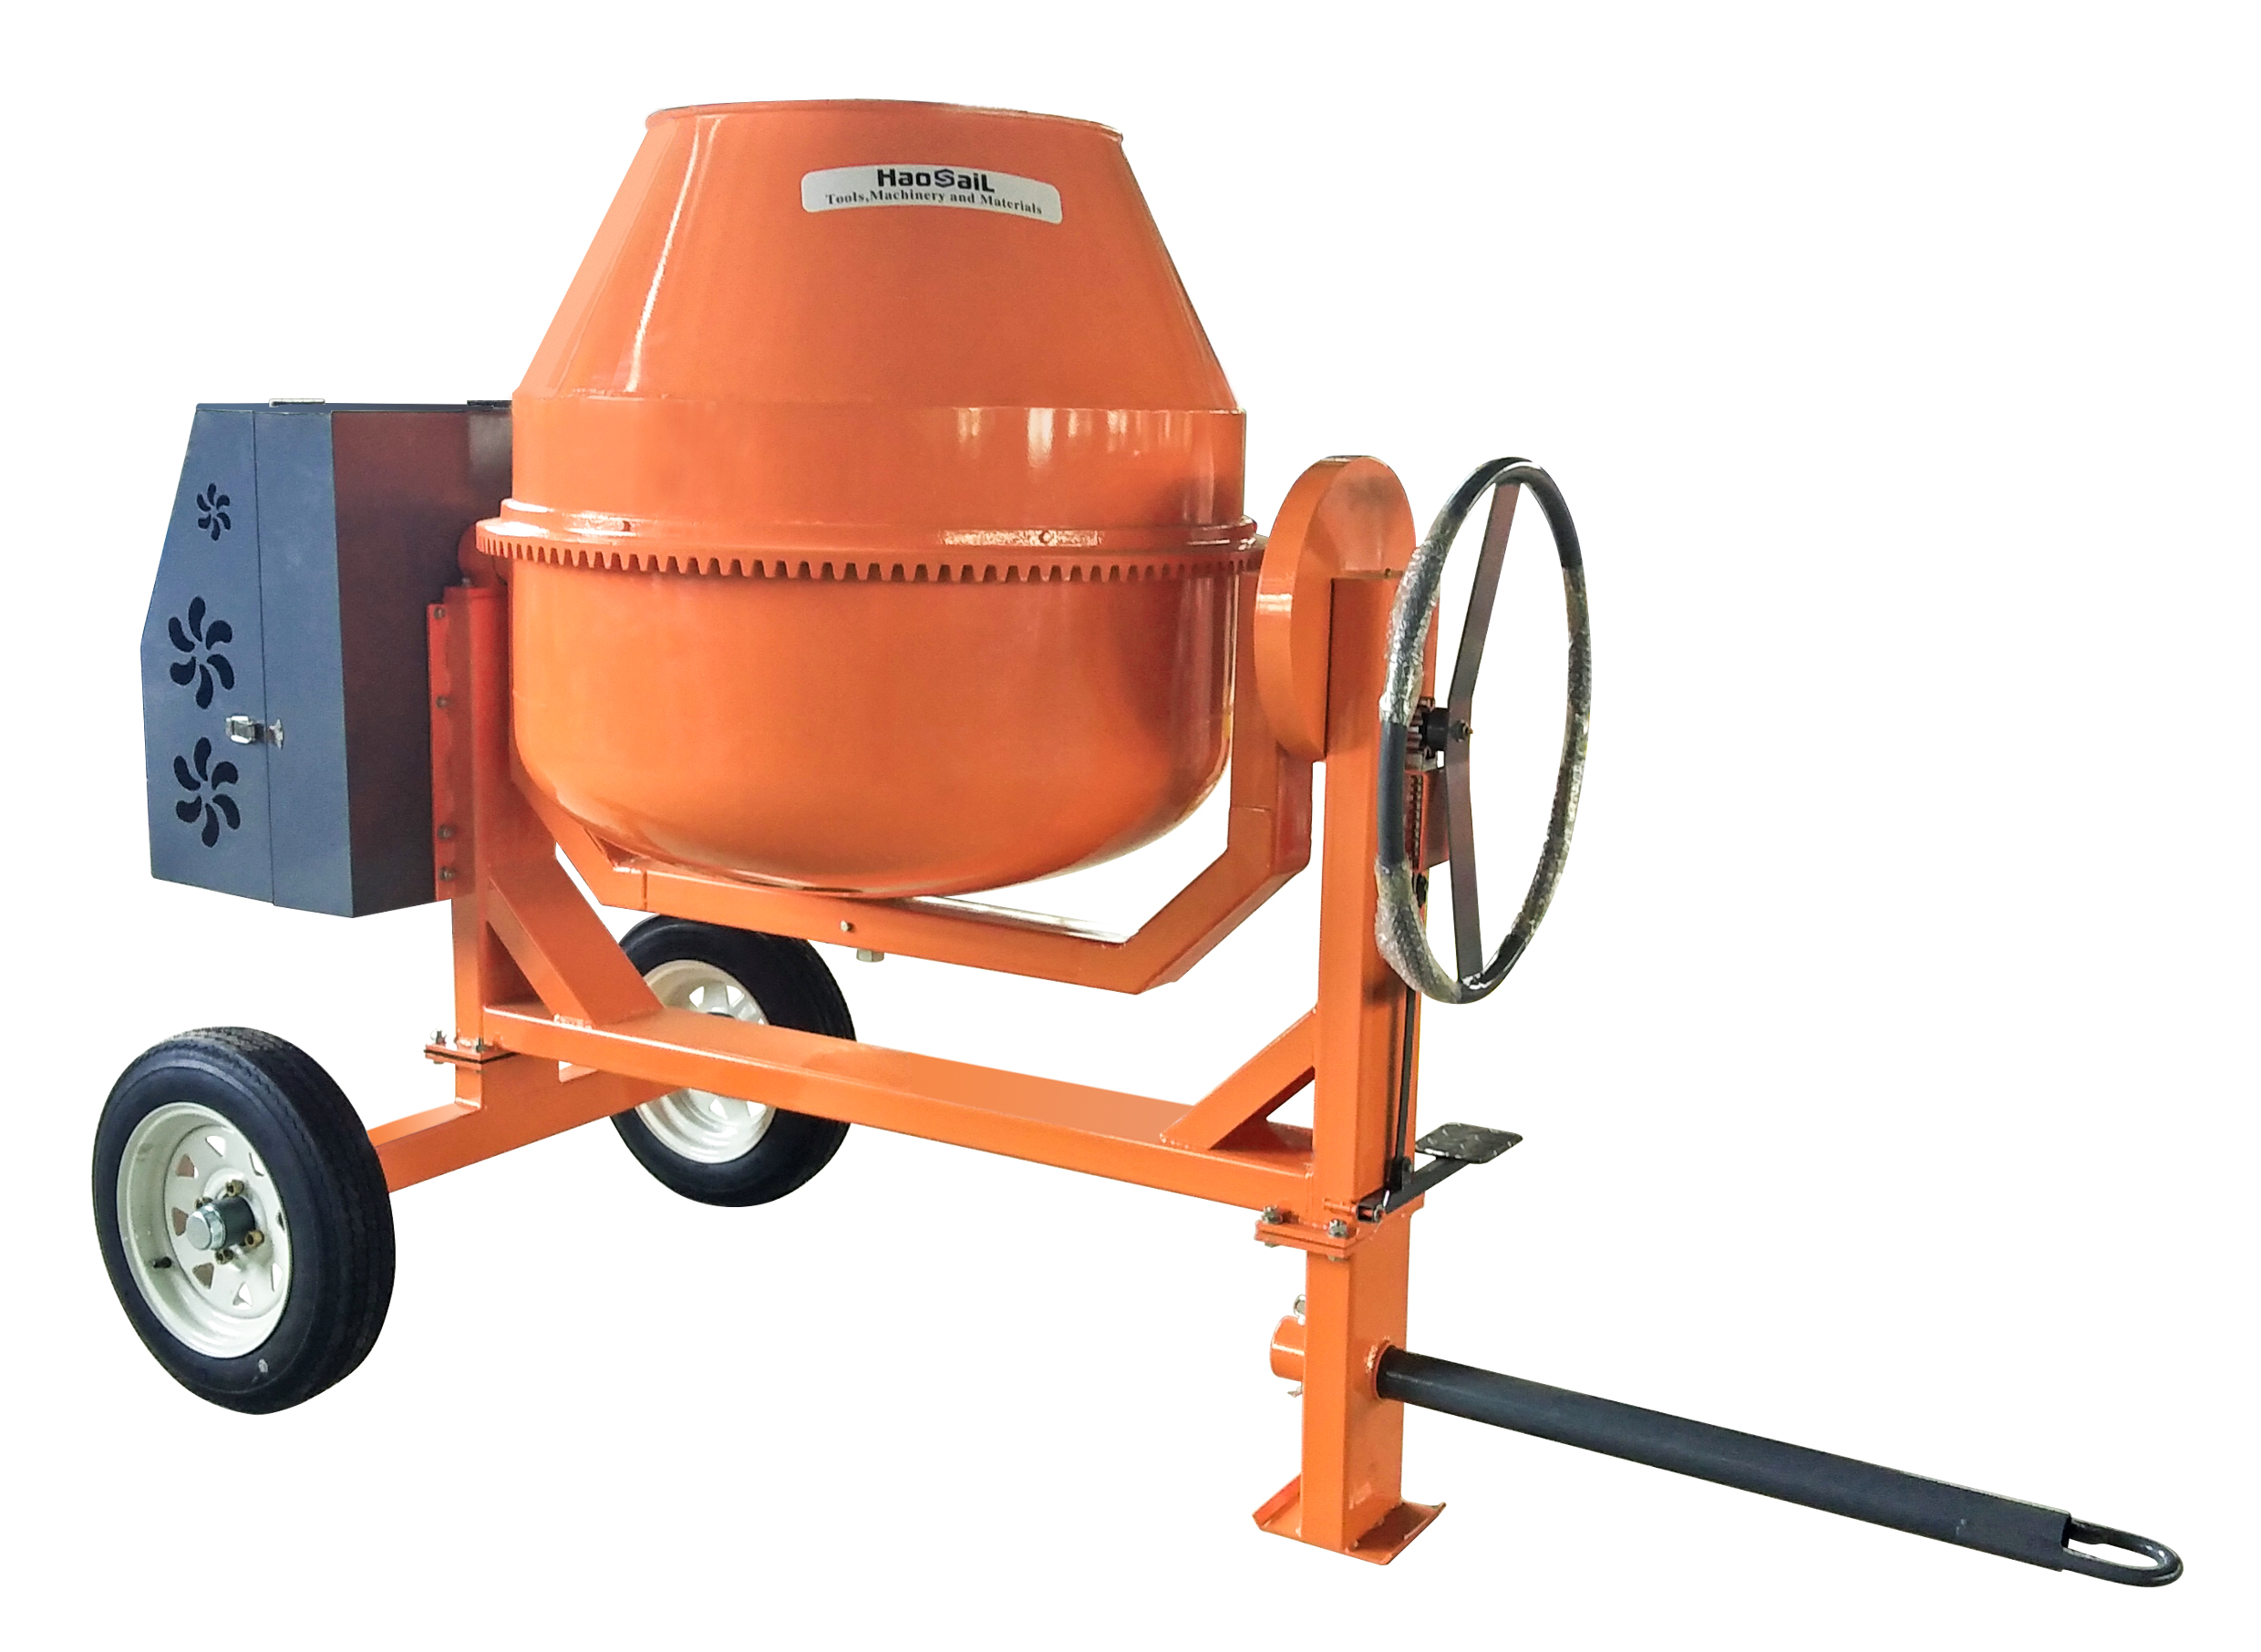 How to Use a Concrete Mixer: A Step-by-Step Guide